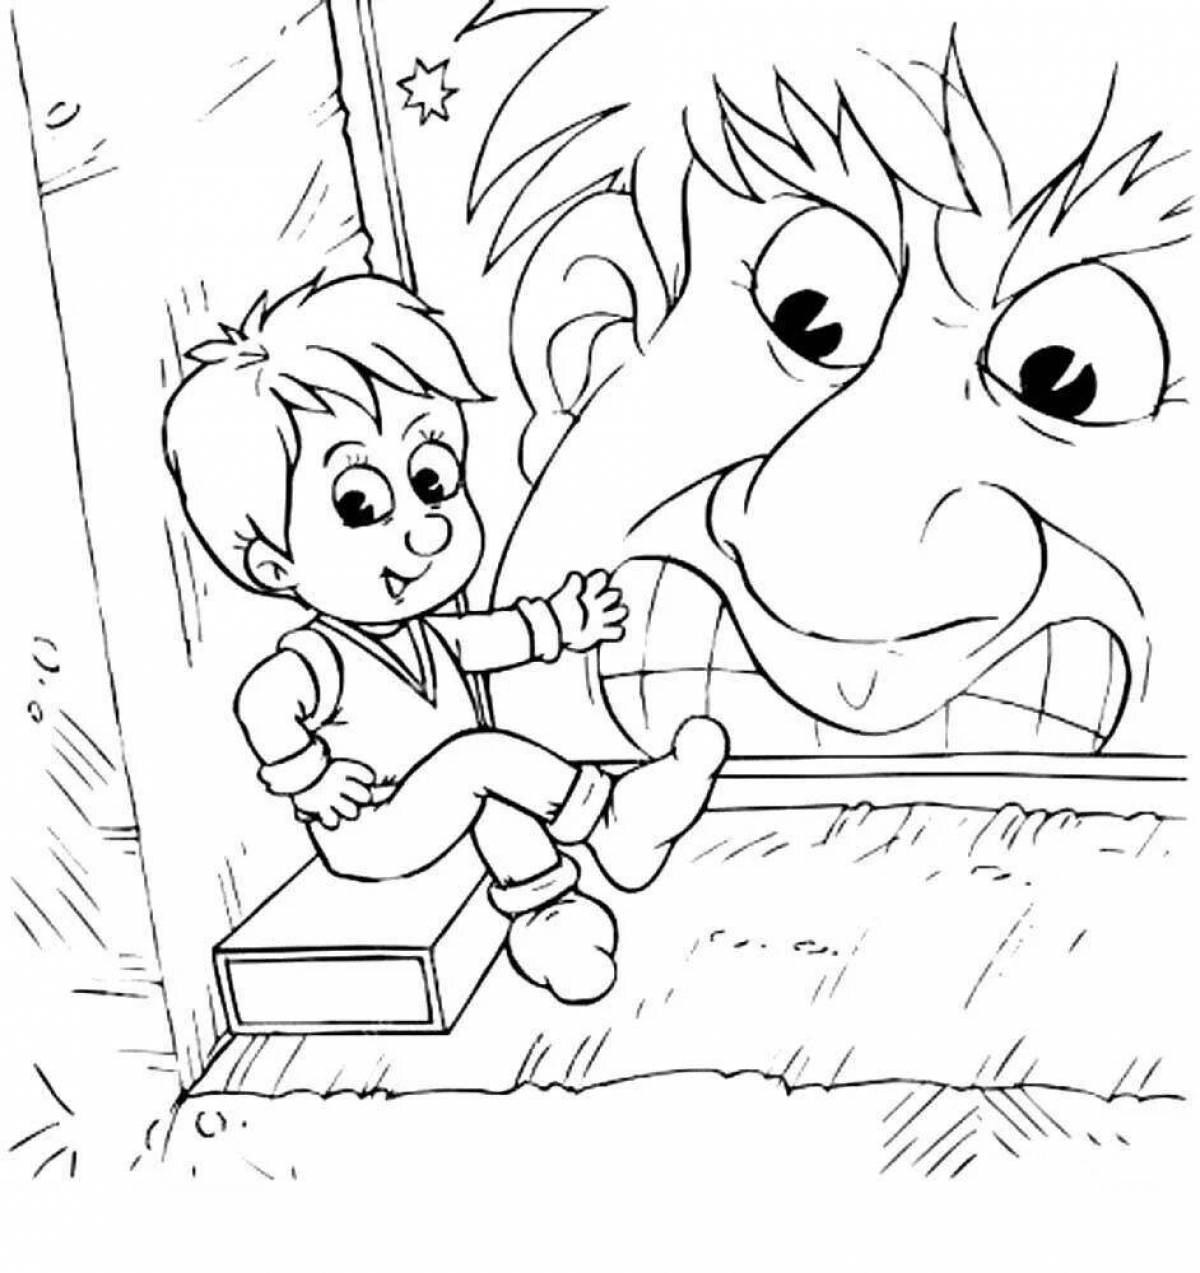 Coloring page of a cheerful little boy